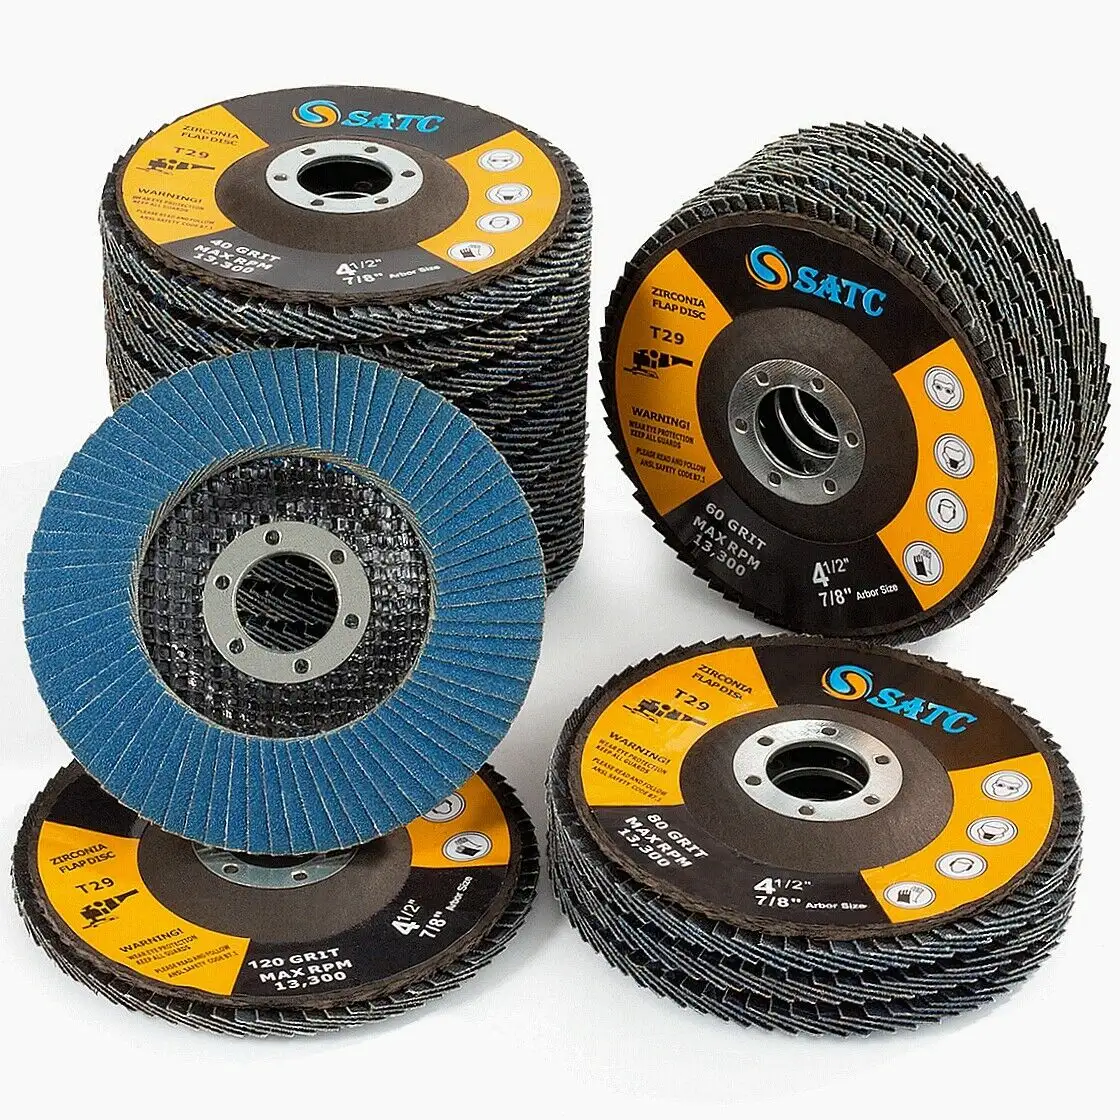 USA Warehouse Shipping Within 24h 20PCS 4.5'' Flap Discs 40 60 80 120 Grit For Angle Grinder